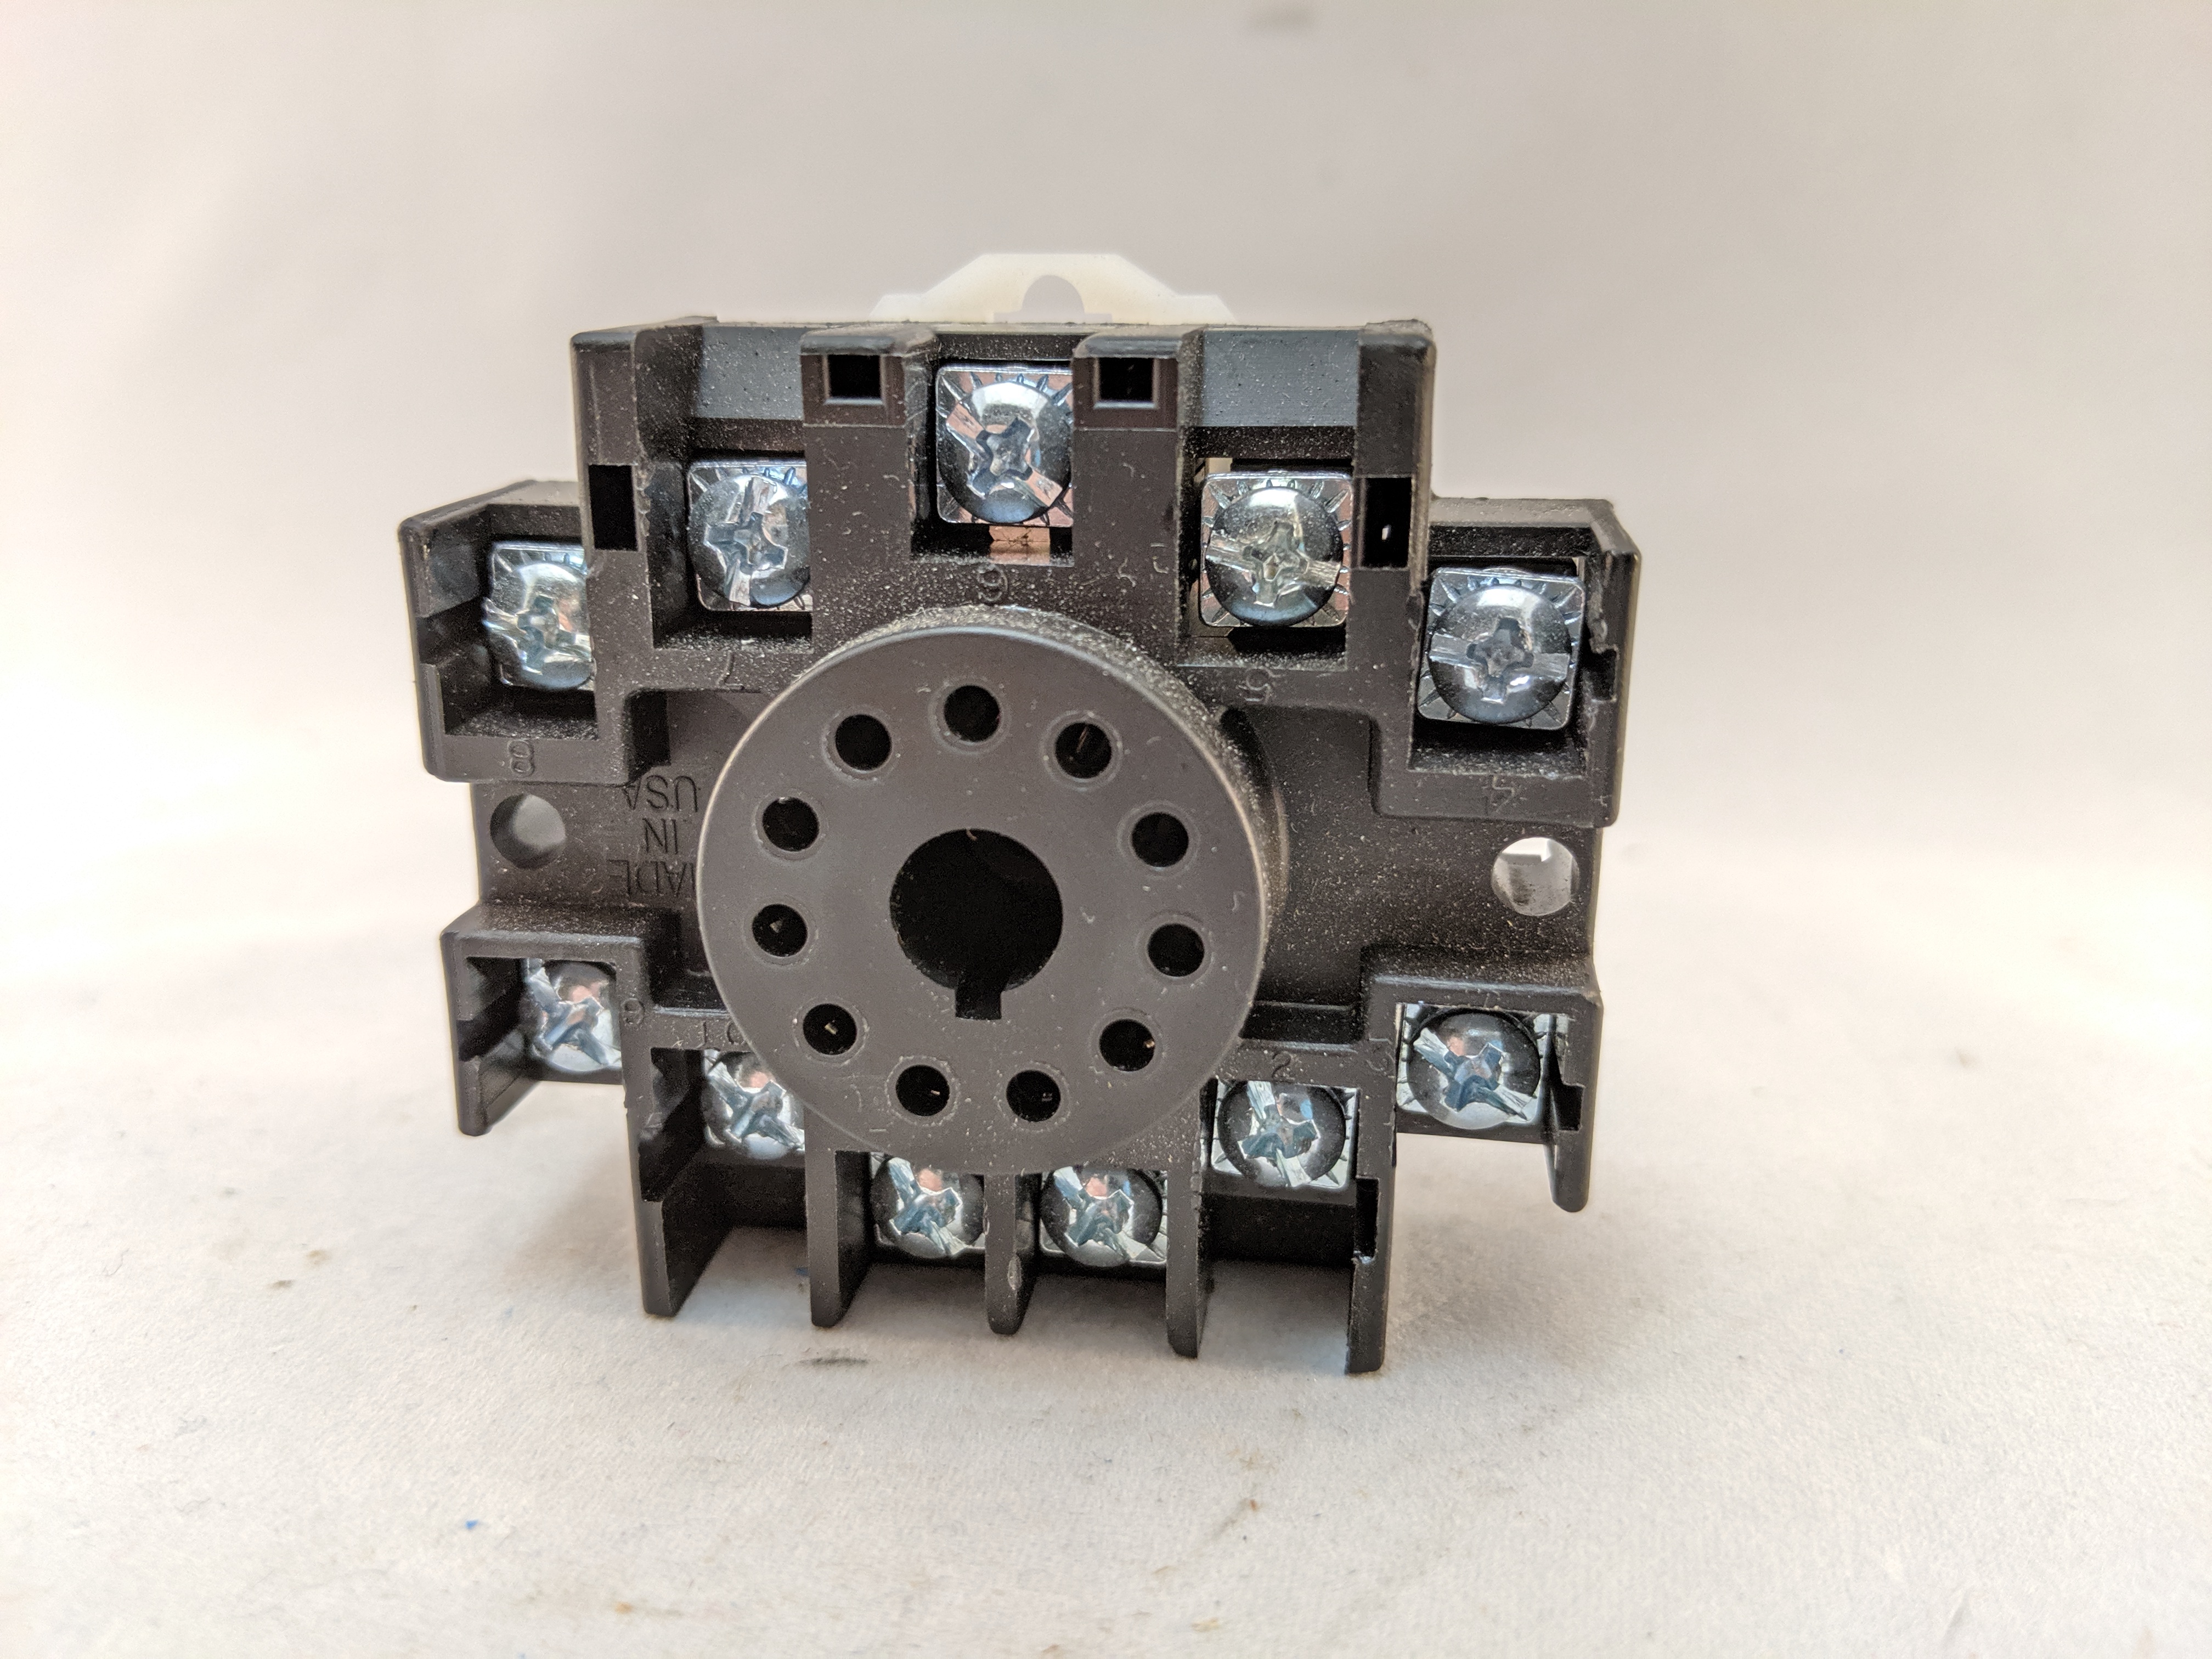 11 PIN SOCKET FOR WARRICK RELAY-CHECK FOR PRICING